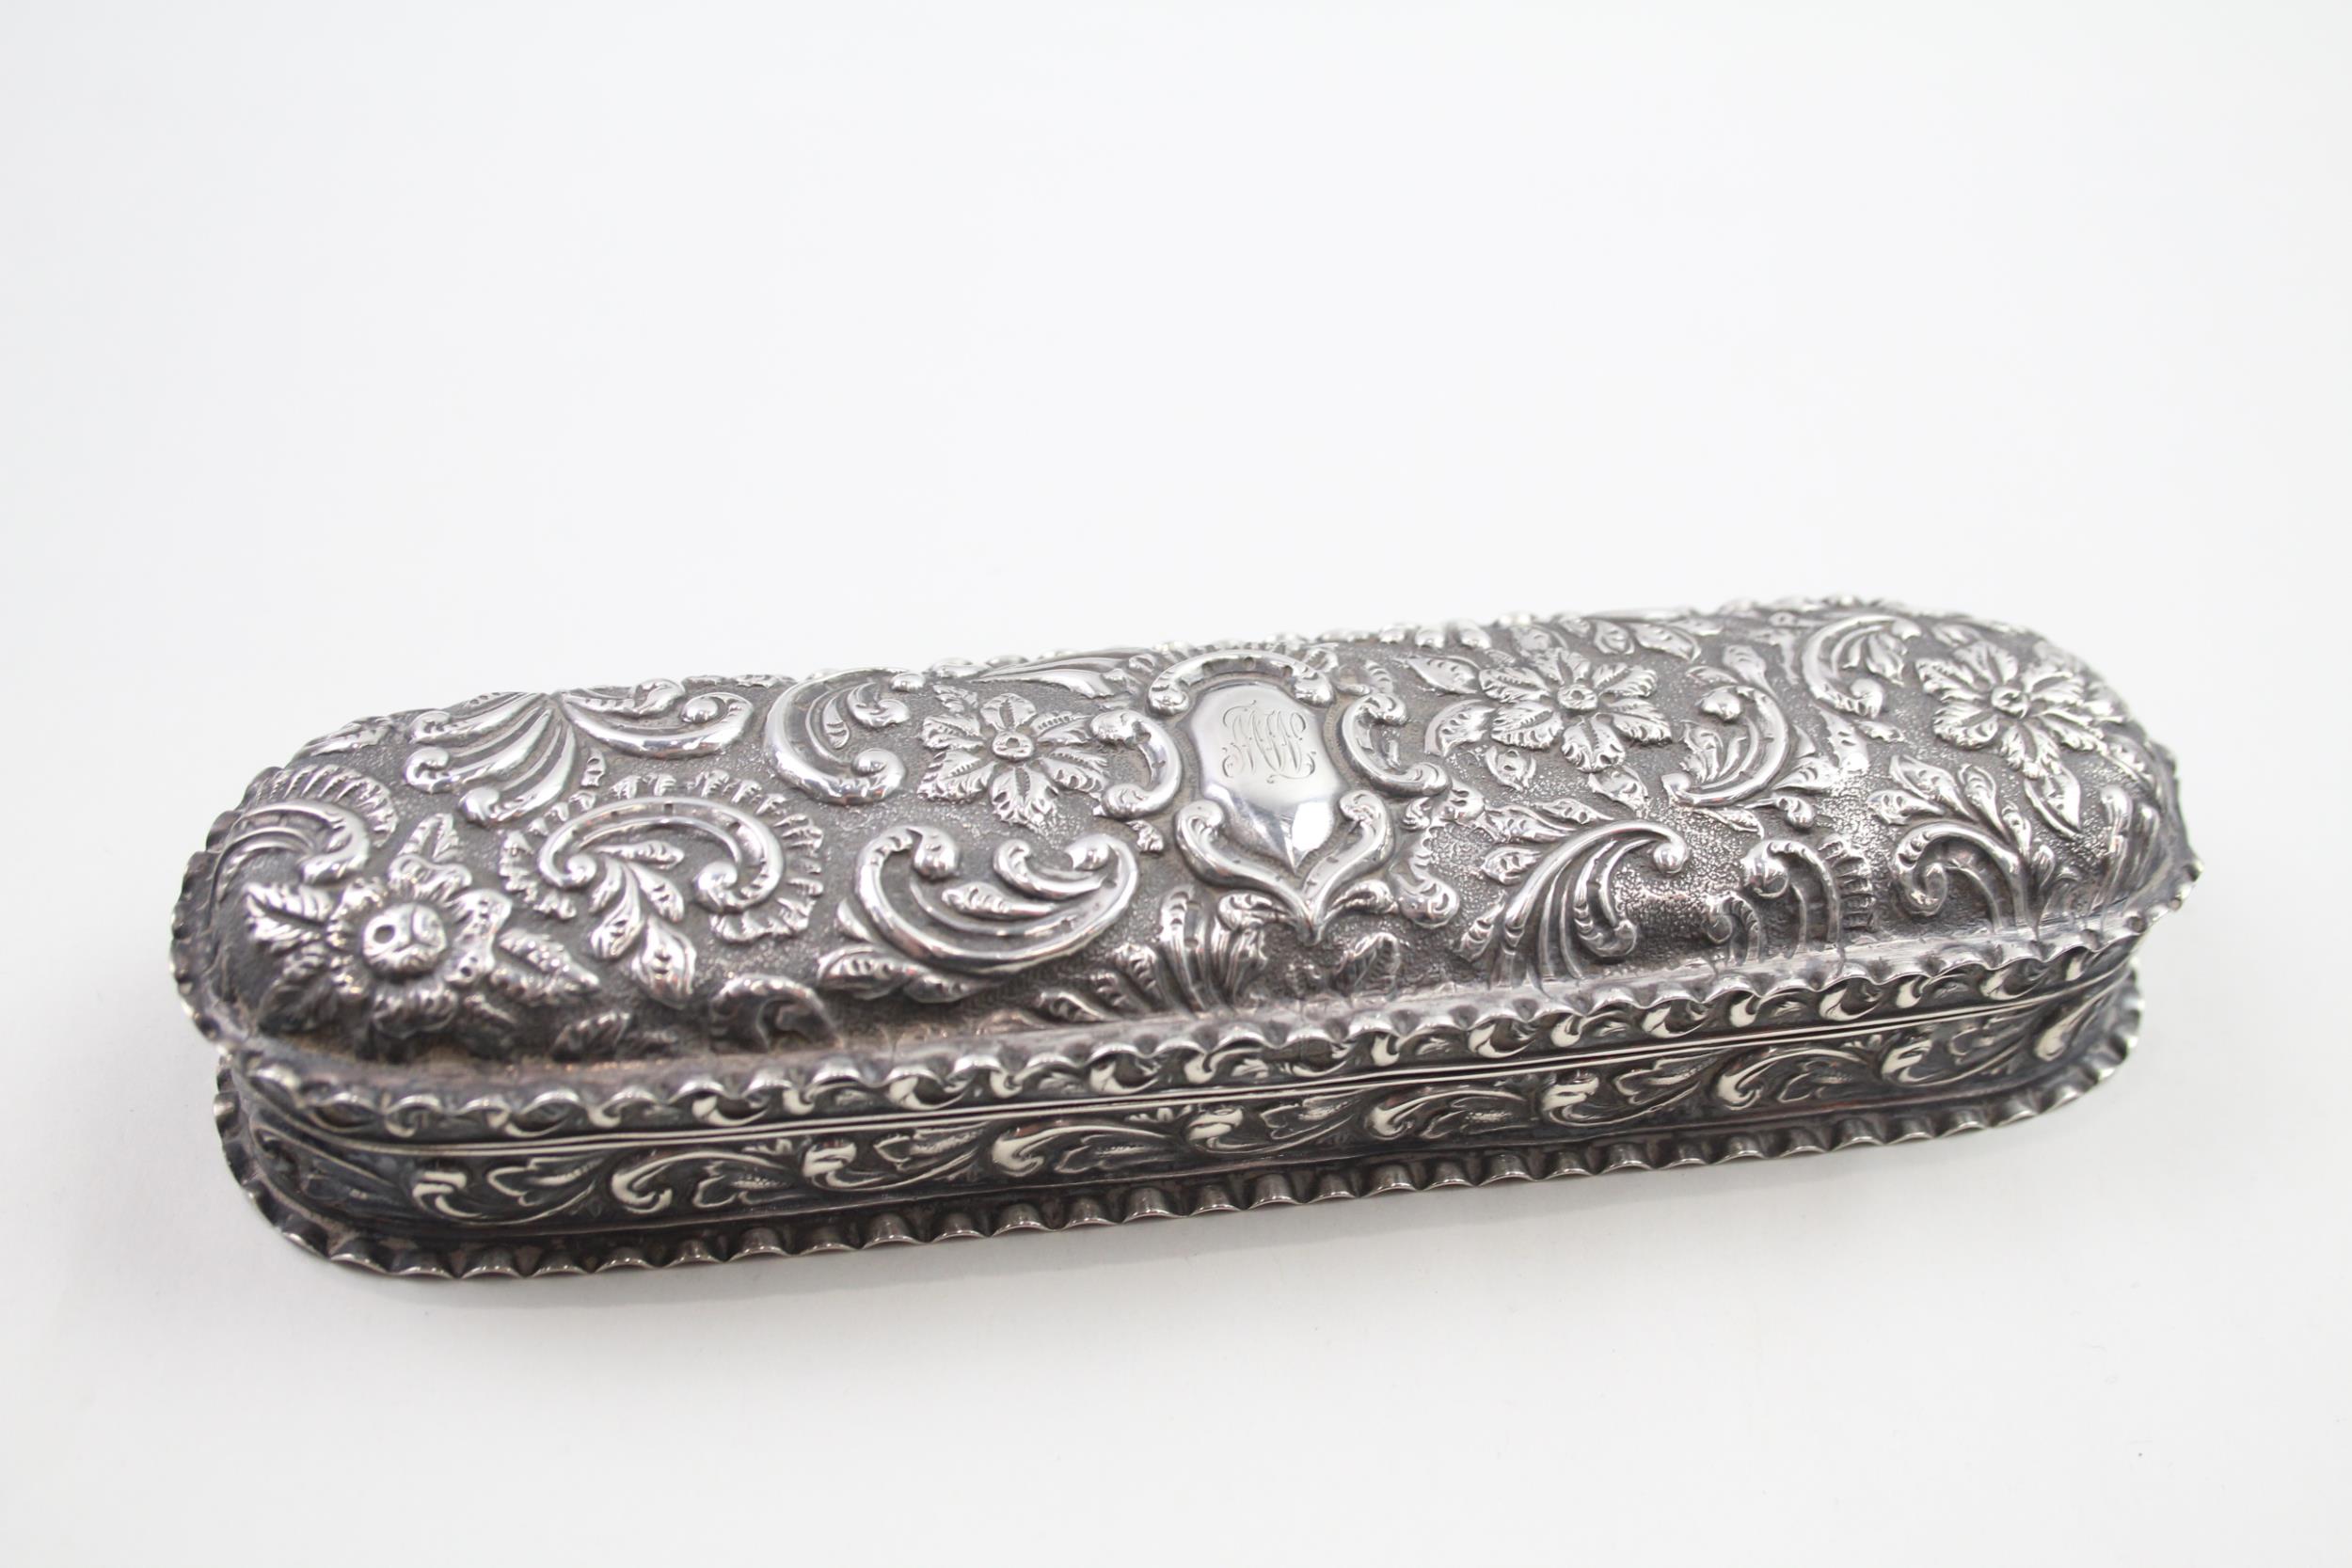 Antique Edwardian 1902 Chester Sterling Silver Long Trinket / Jewellery Box 129g - w/ Engraved